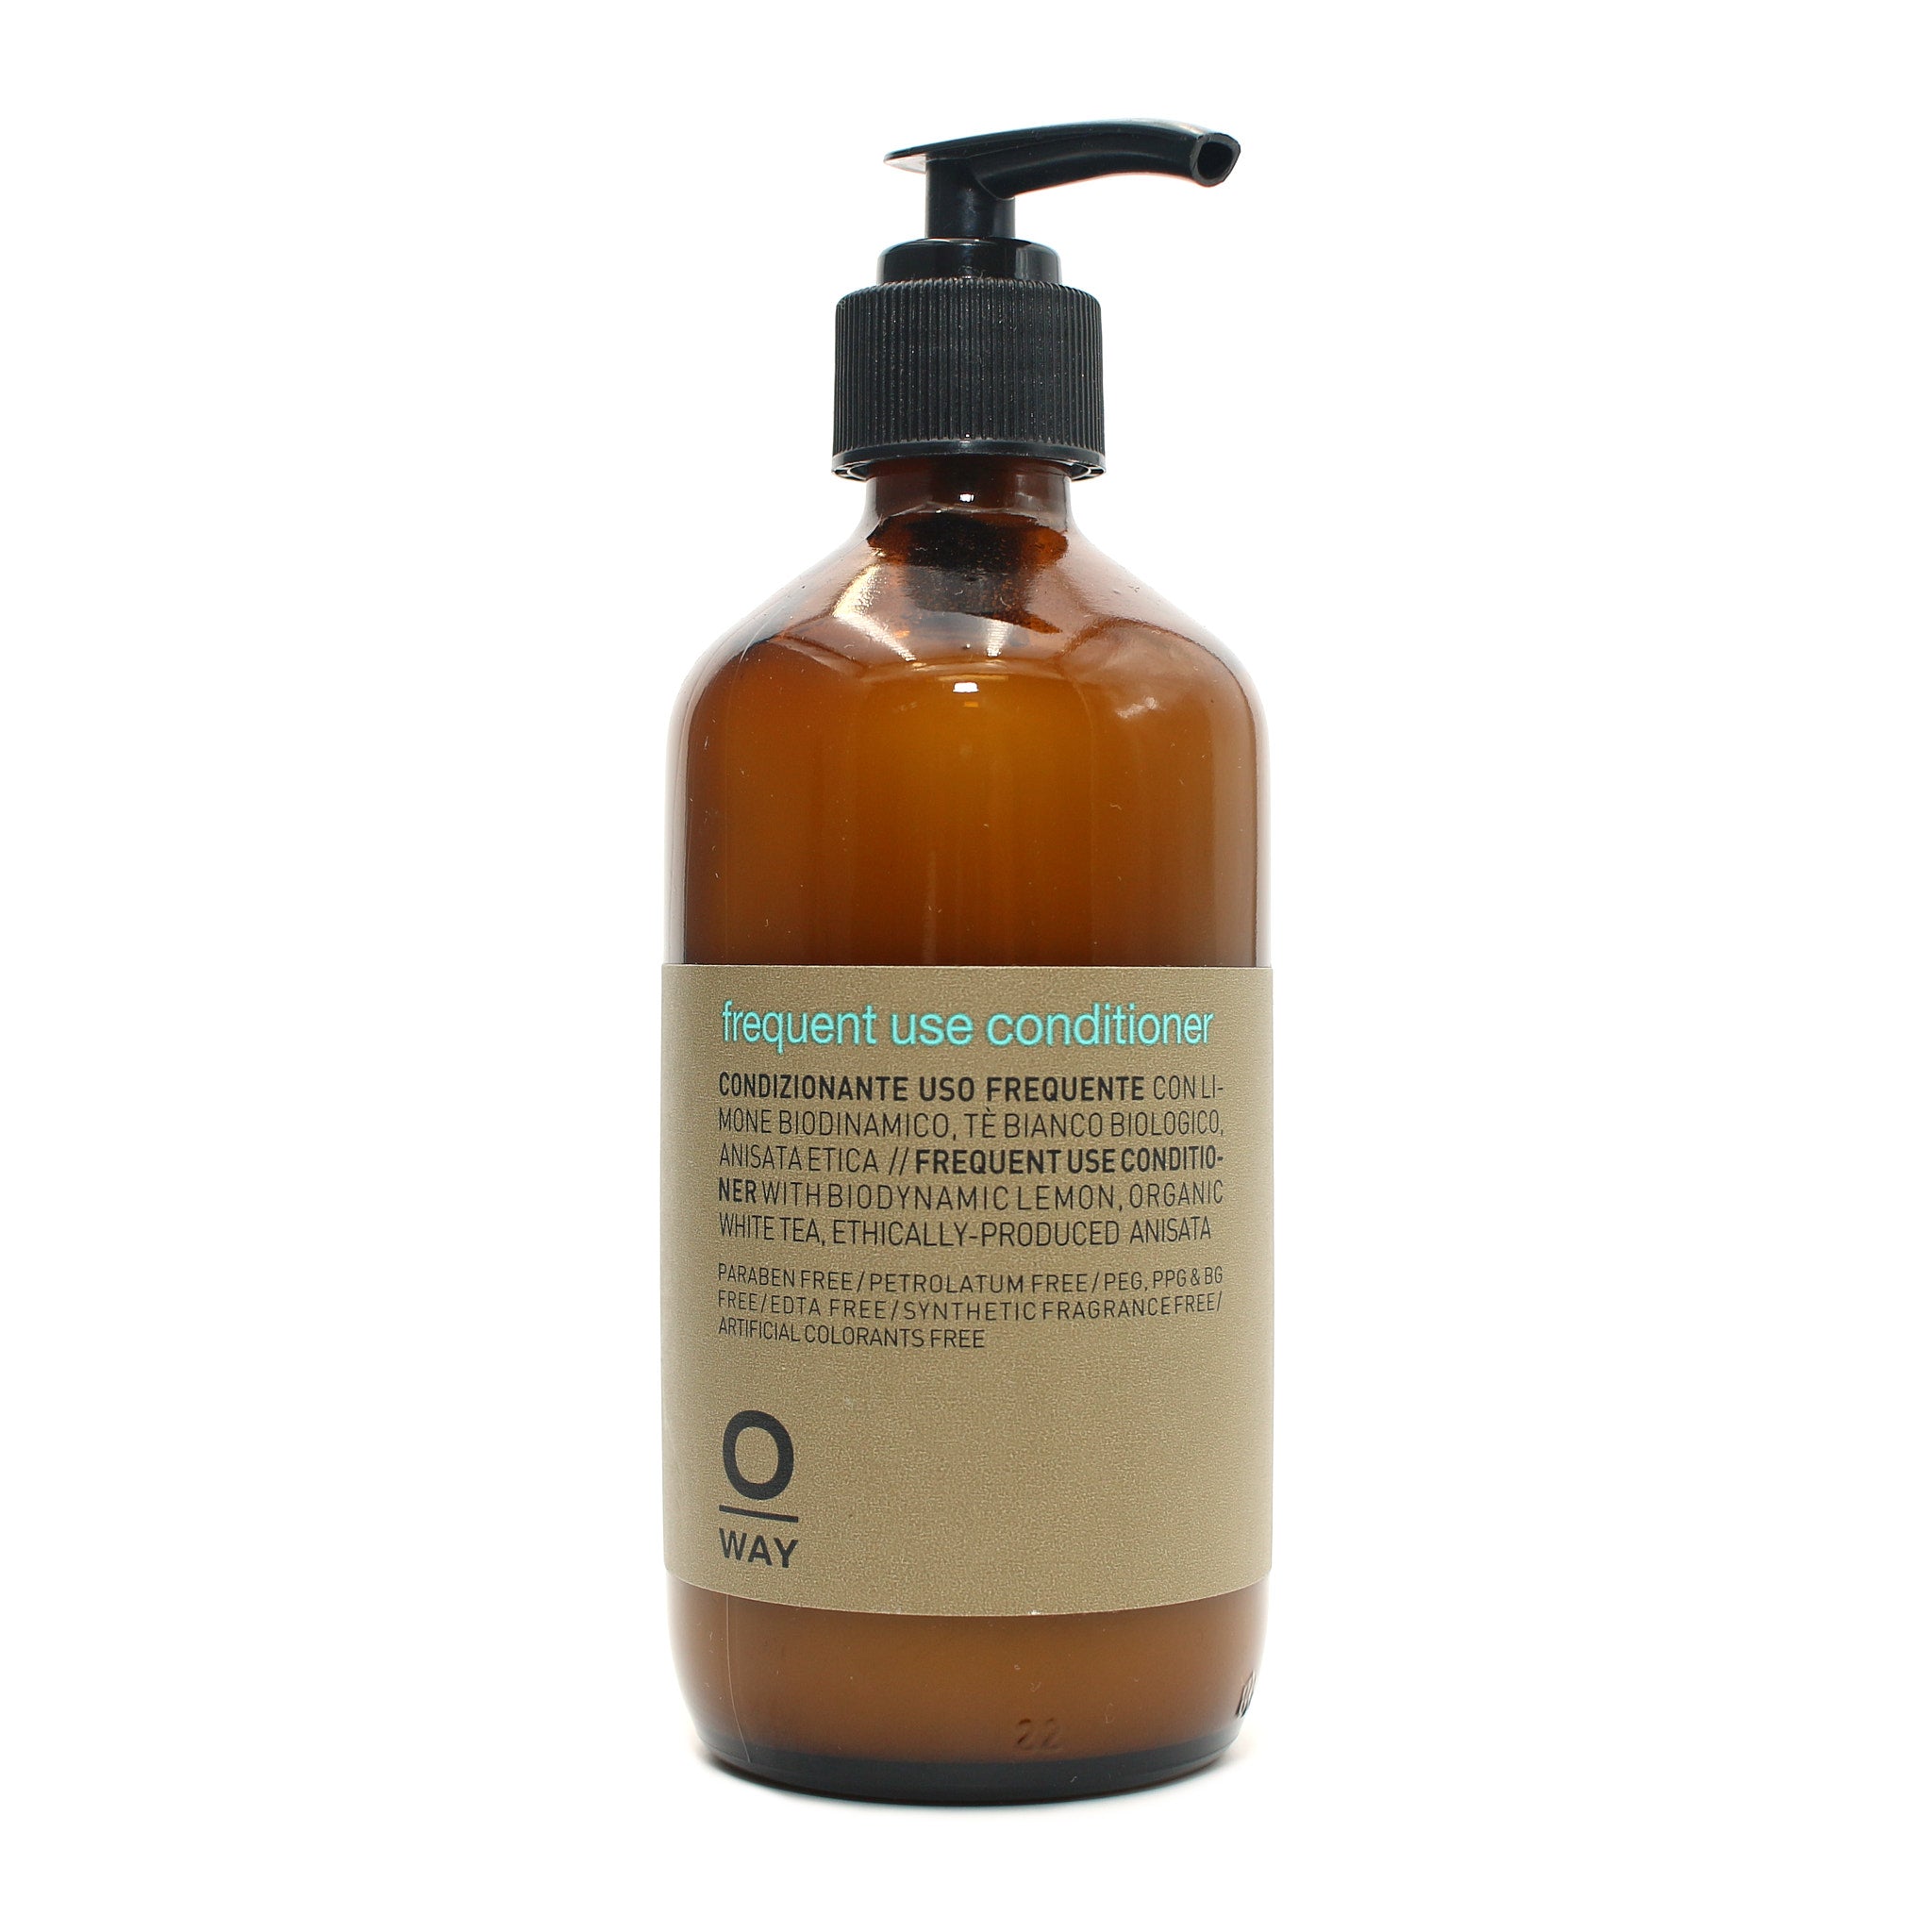 O WAY Frequent Use Conditioner 8 oz